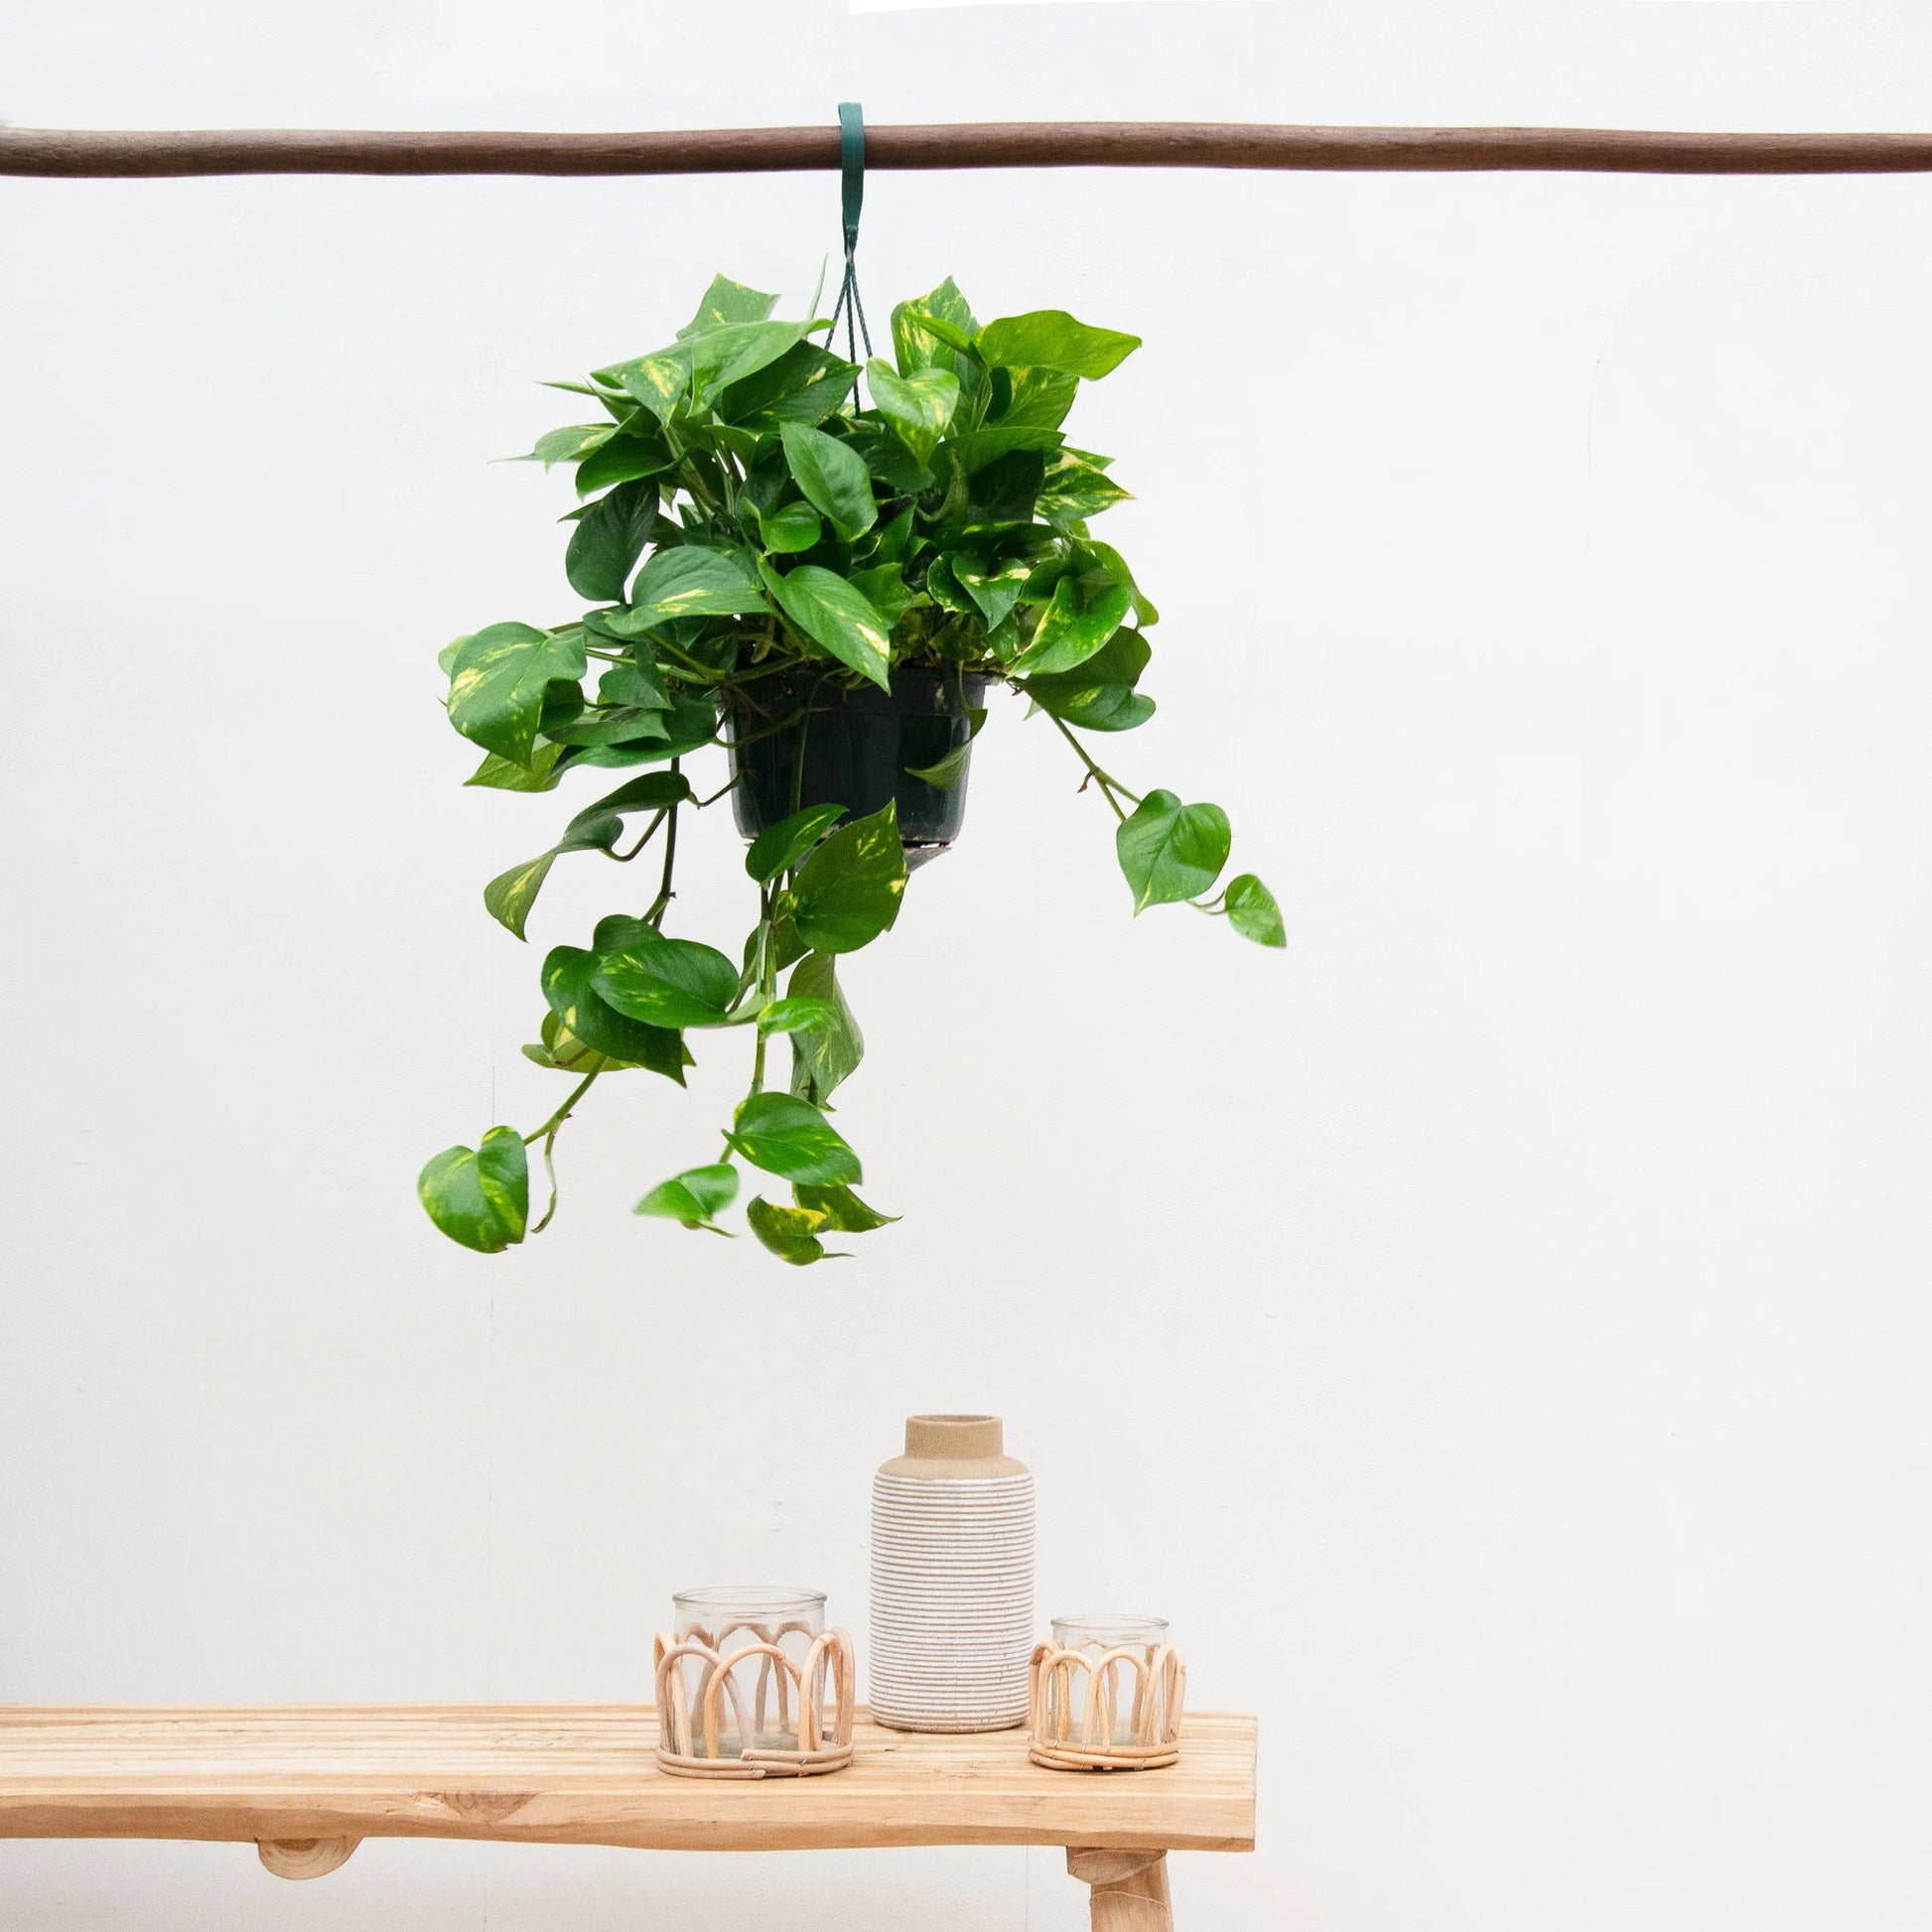 Money Plant (Epipremnum Aureum) with heart-shaped leaves cascading from a hanging basket, displayed indoors.